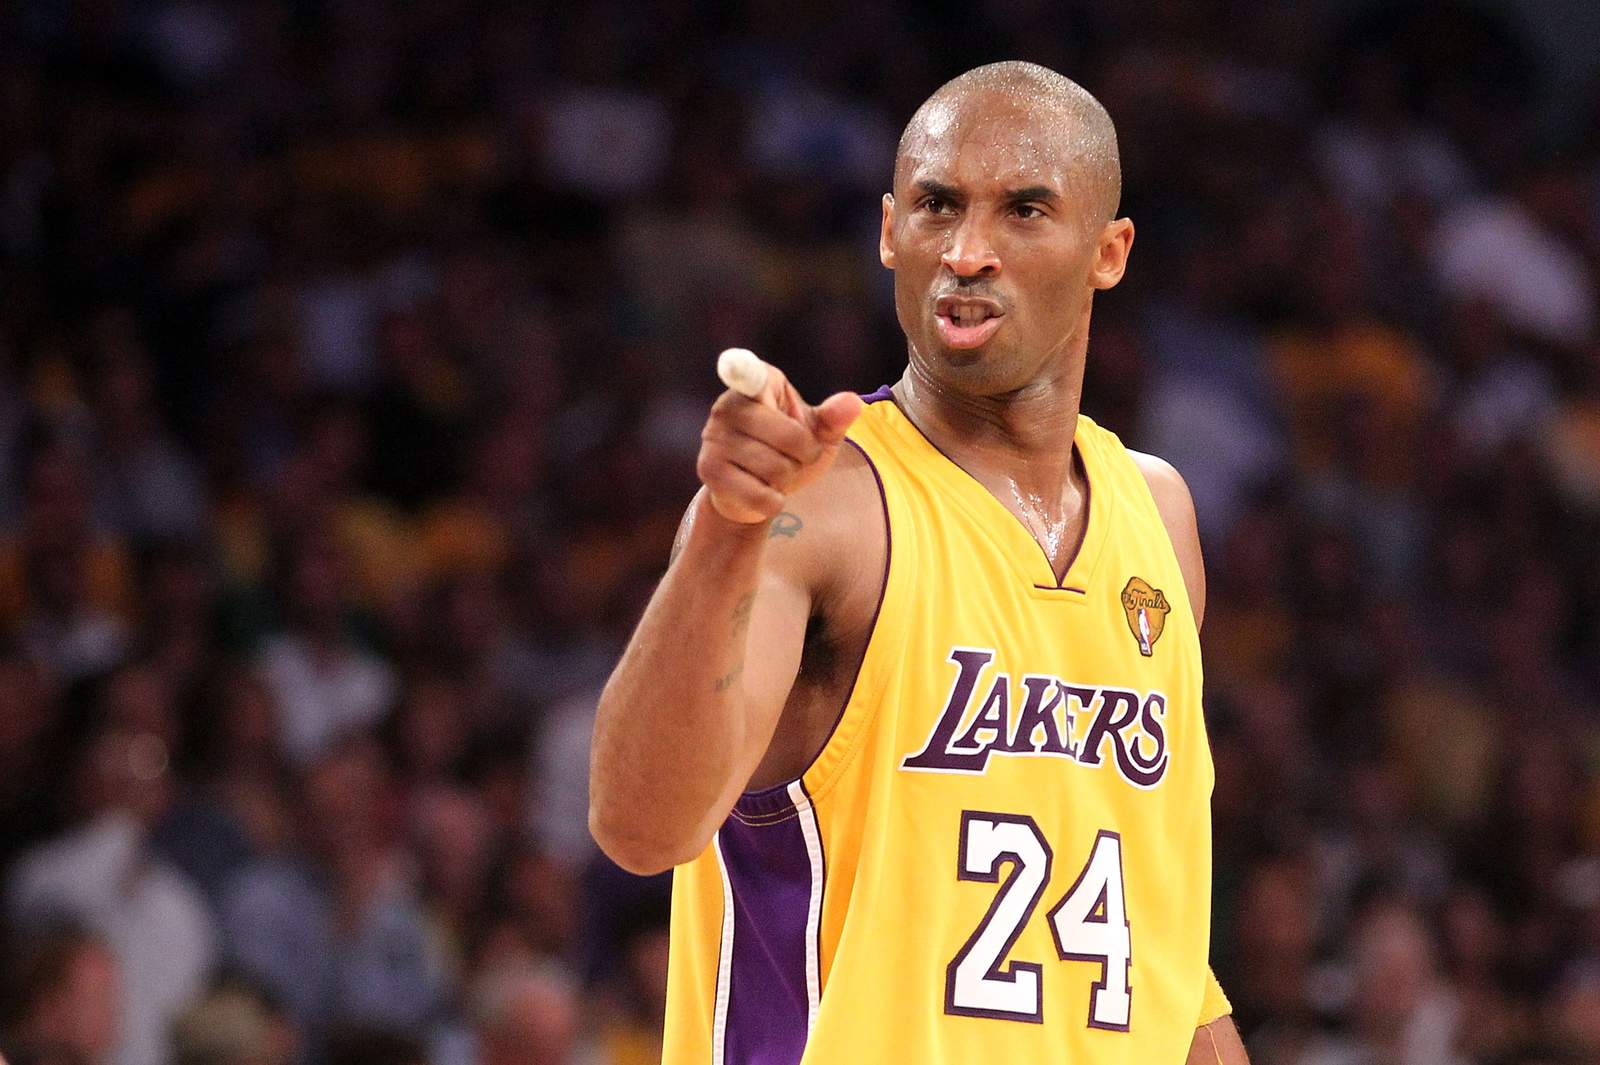 Kobe Bryant points in the second quarter of Game 7 in the 2010 NBA Finals against the Boston Celtics at Staples Center.